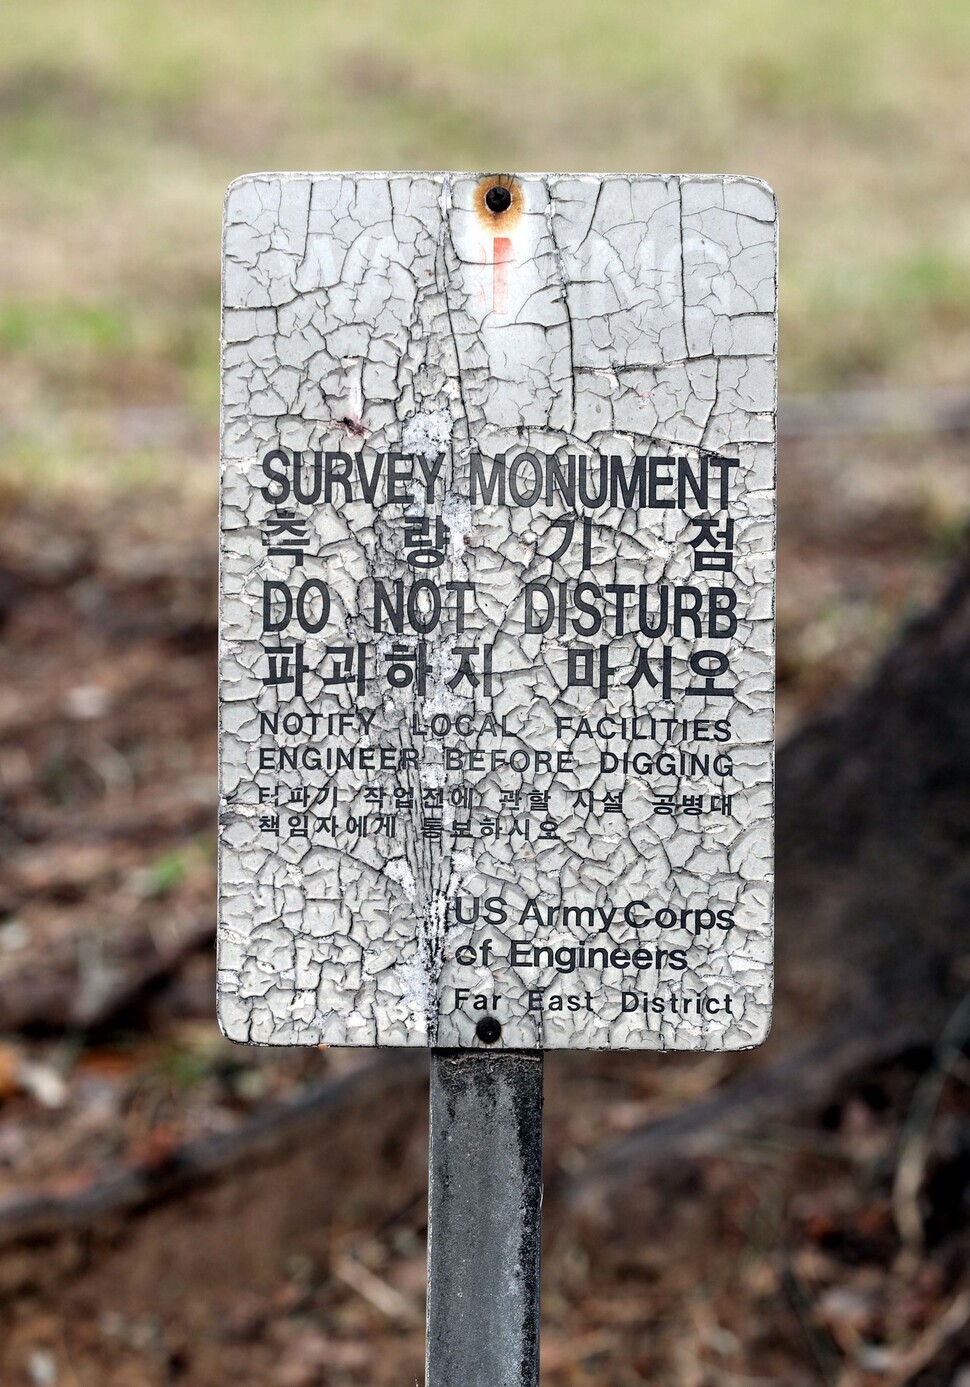 An old sign in Camp Market installed by the US military